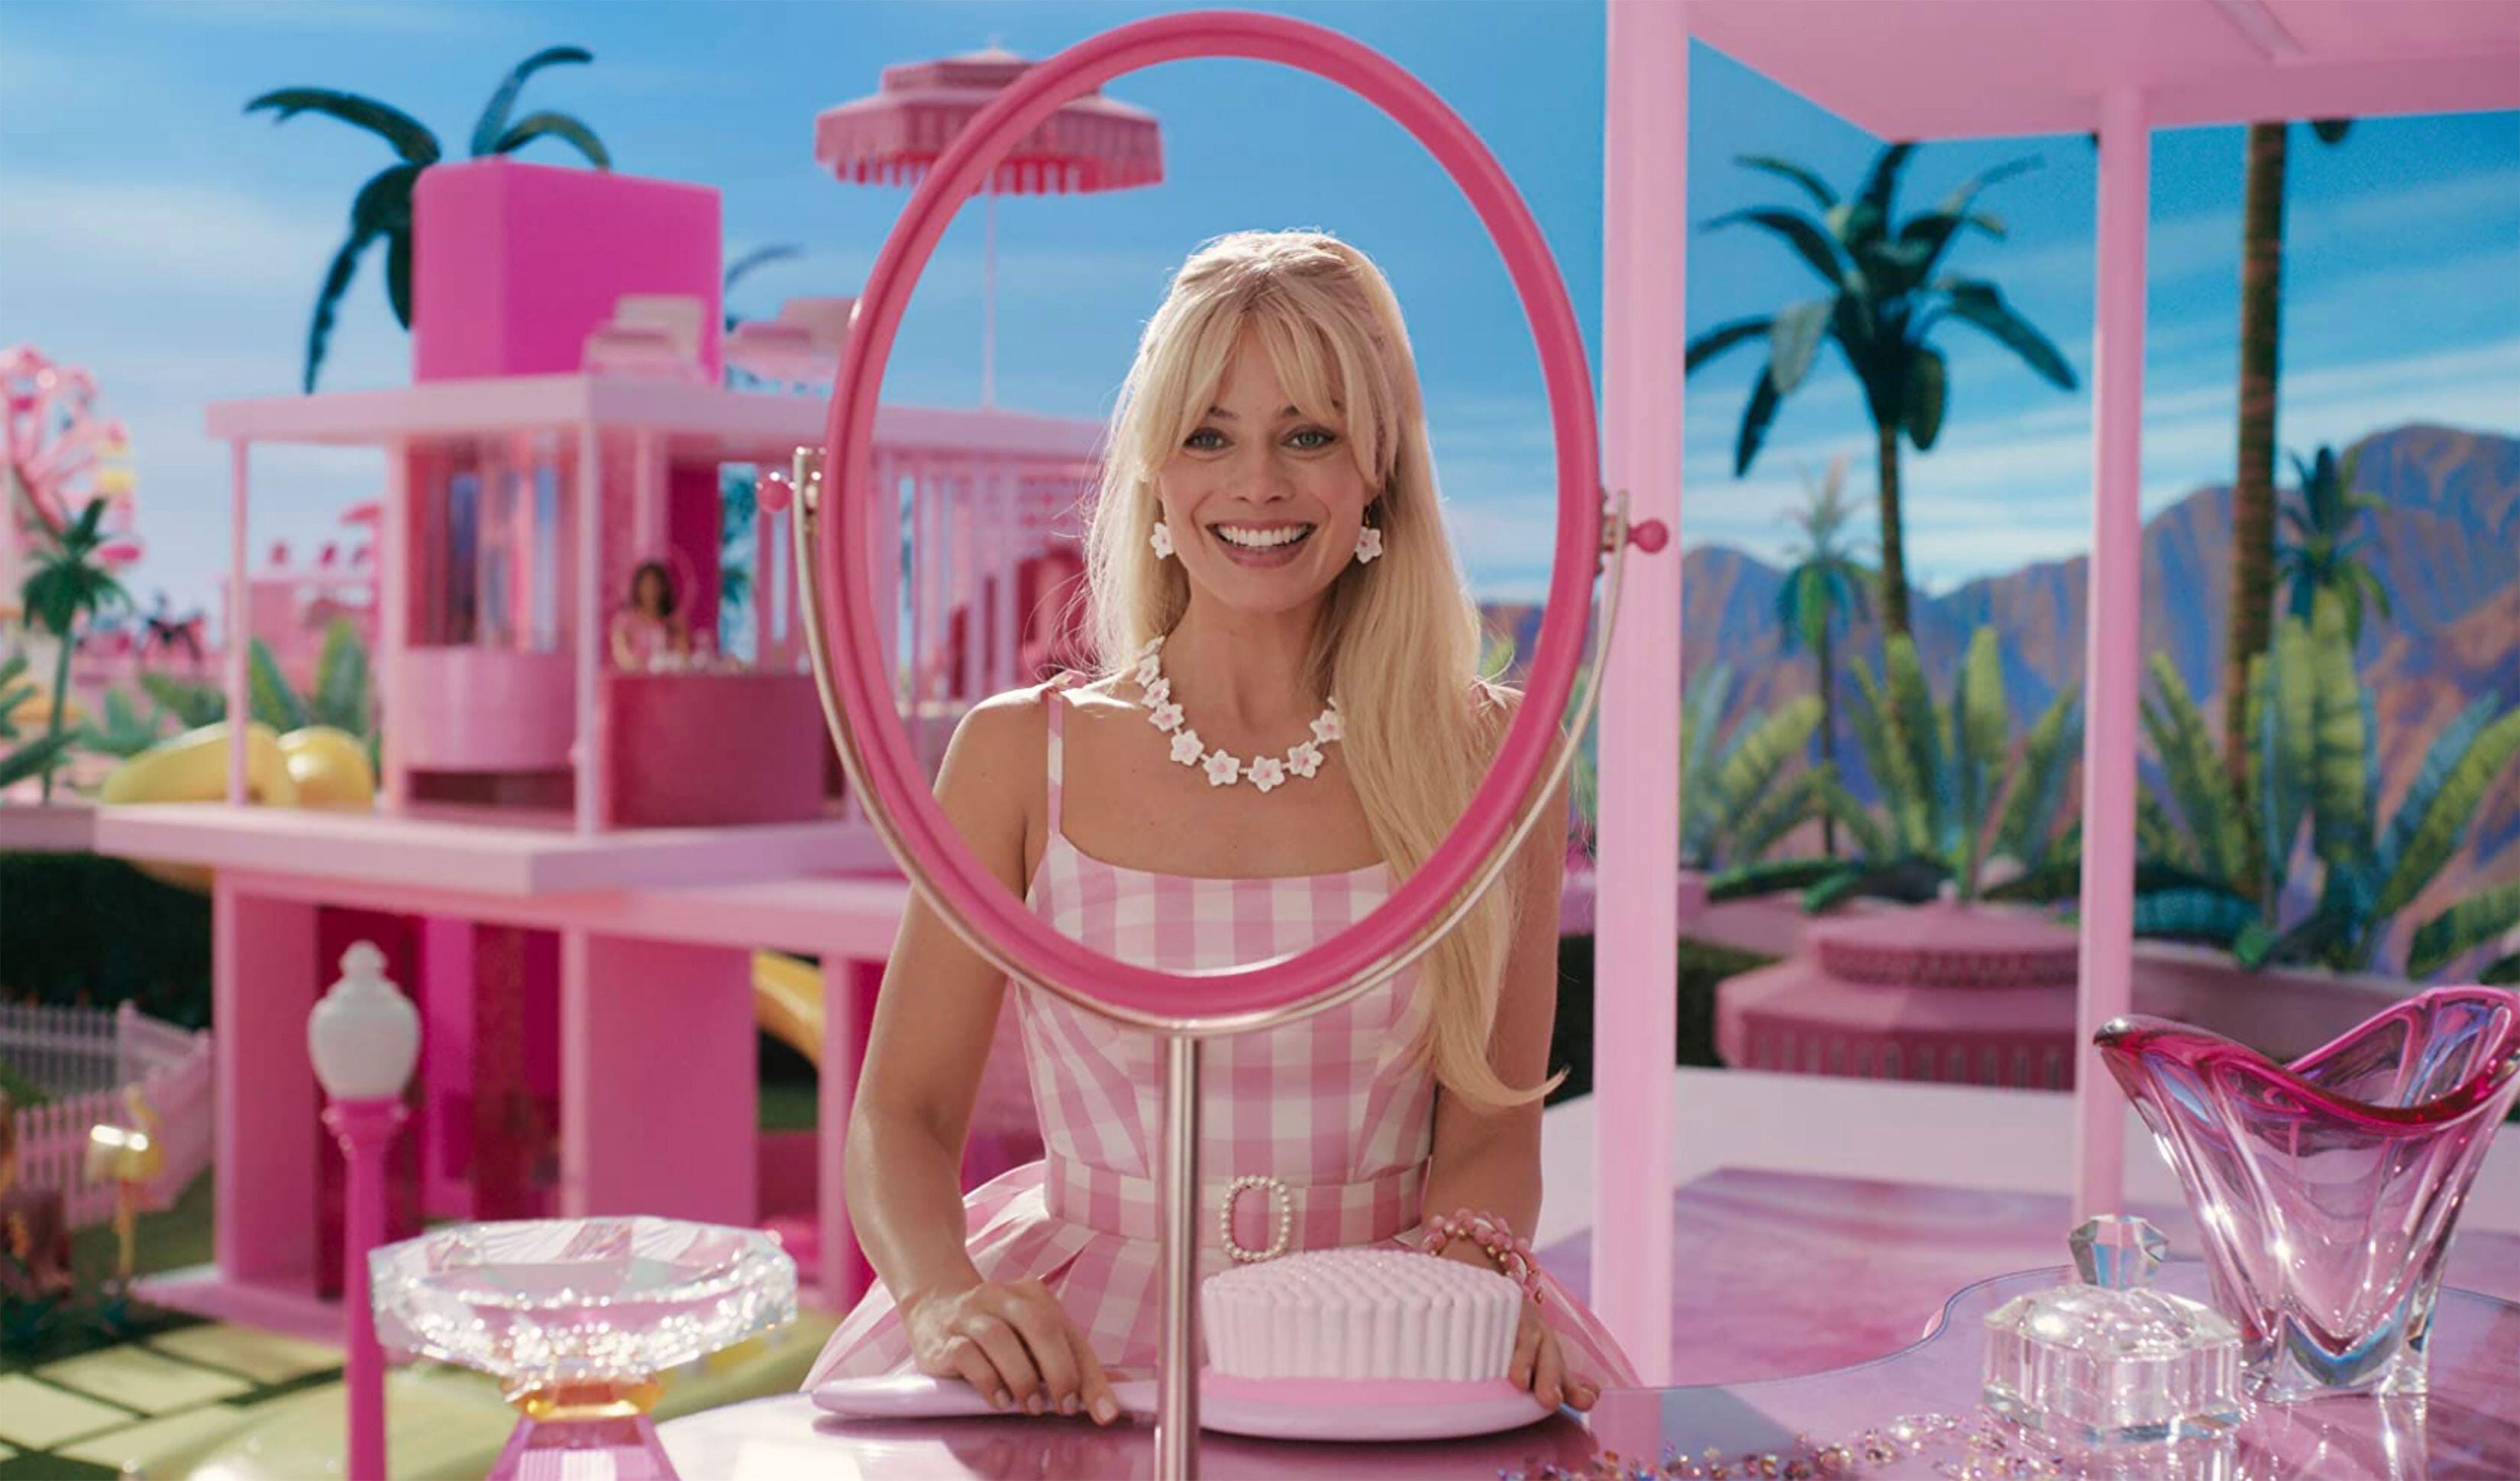 My Crazy Barbie Obsession Is Ruining My Life!